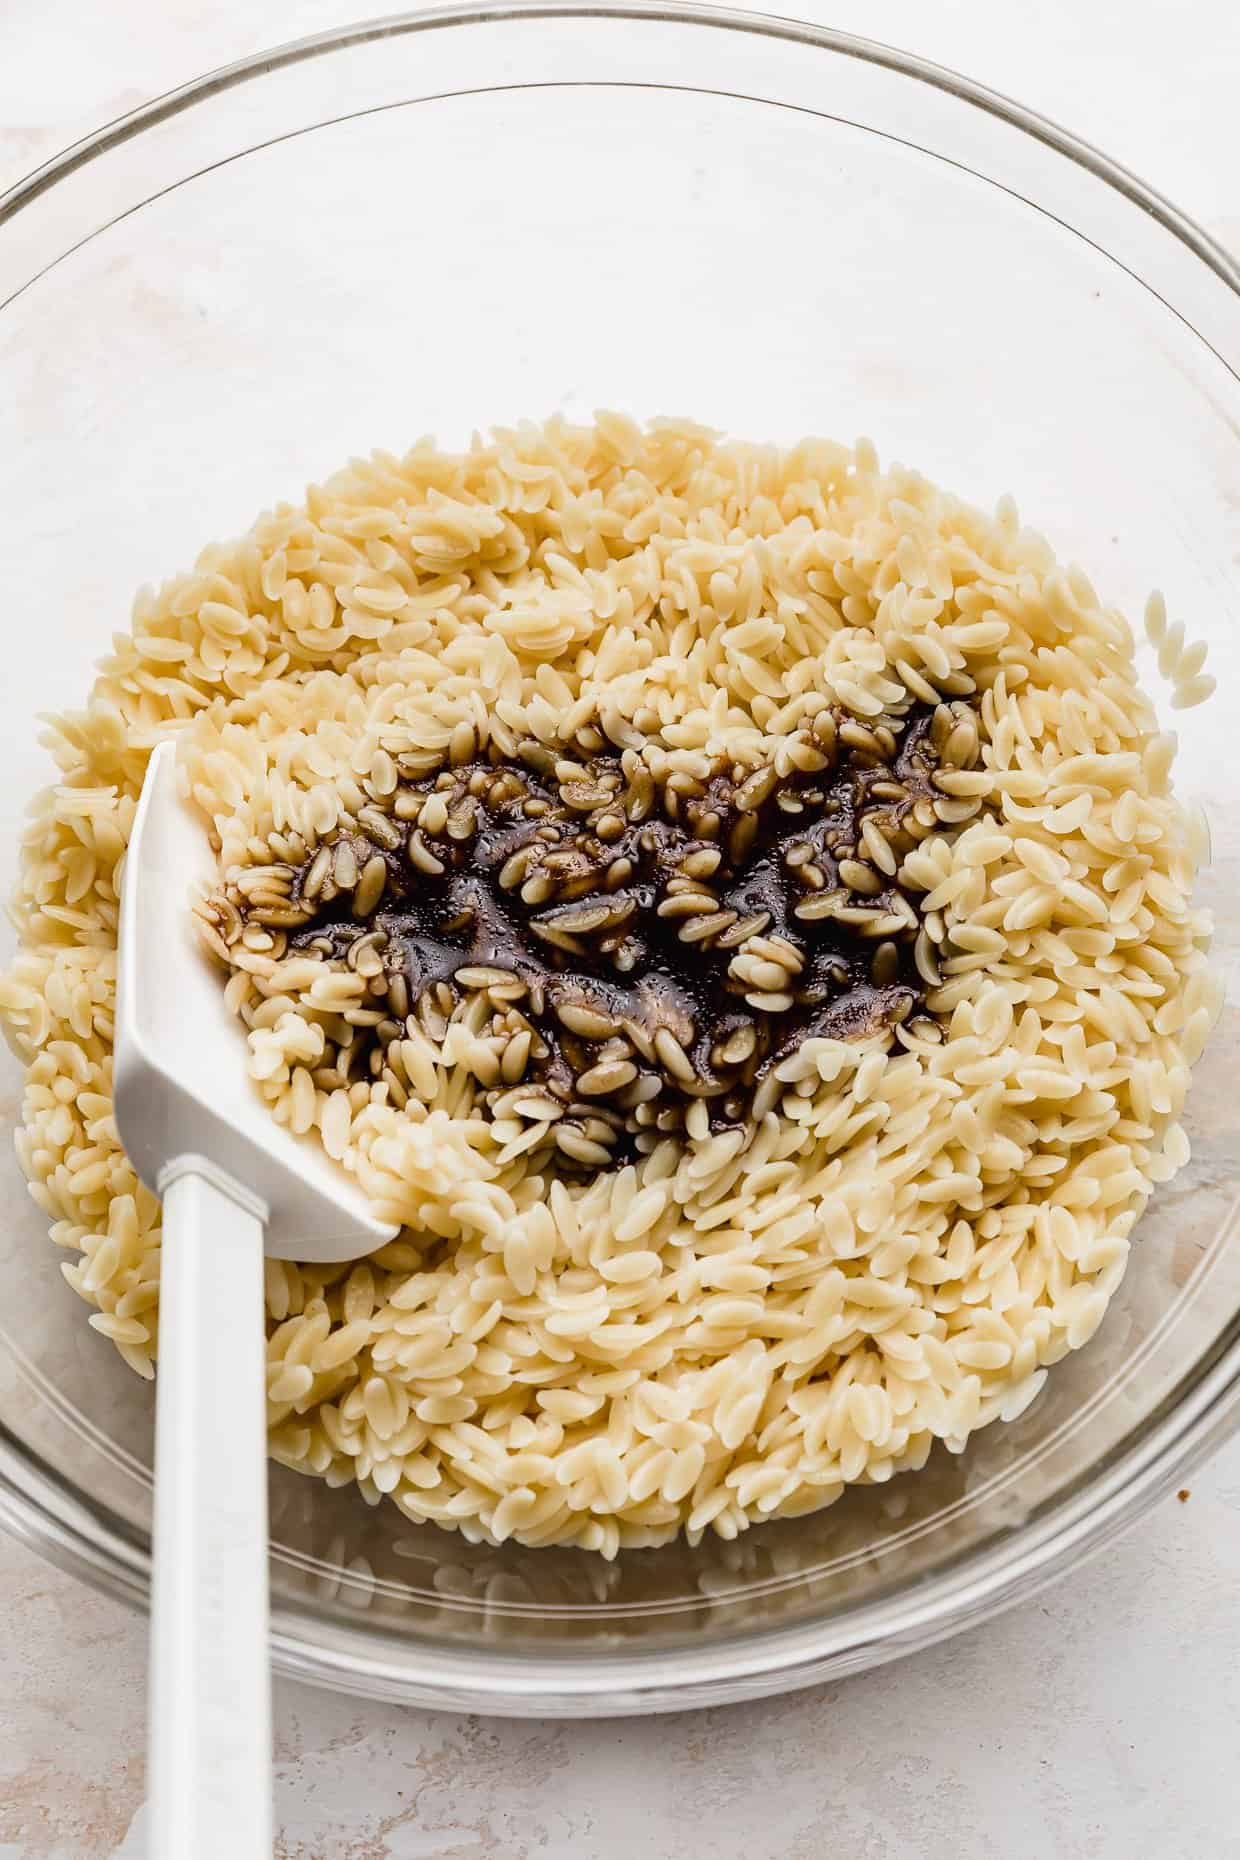 A Caprese Orzo Salad dressing made from balsamic vinegar overtop of the orzo pasta.